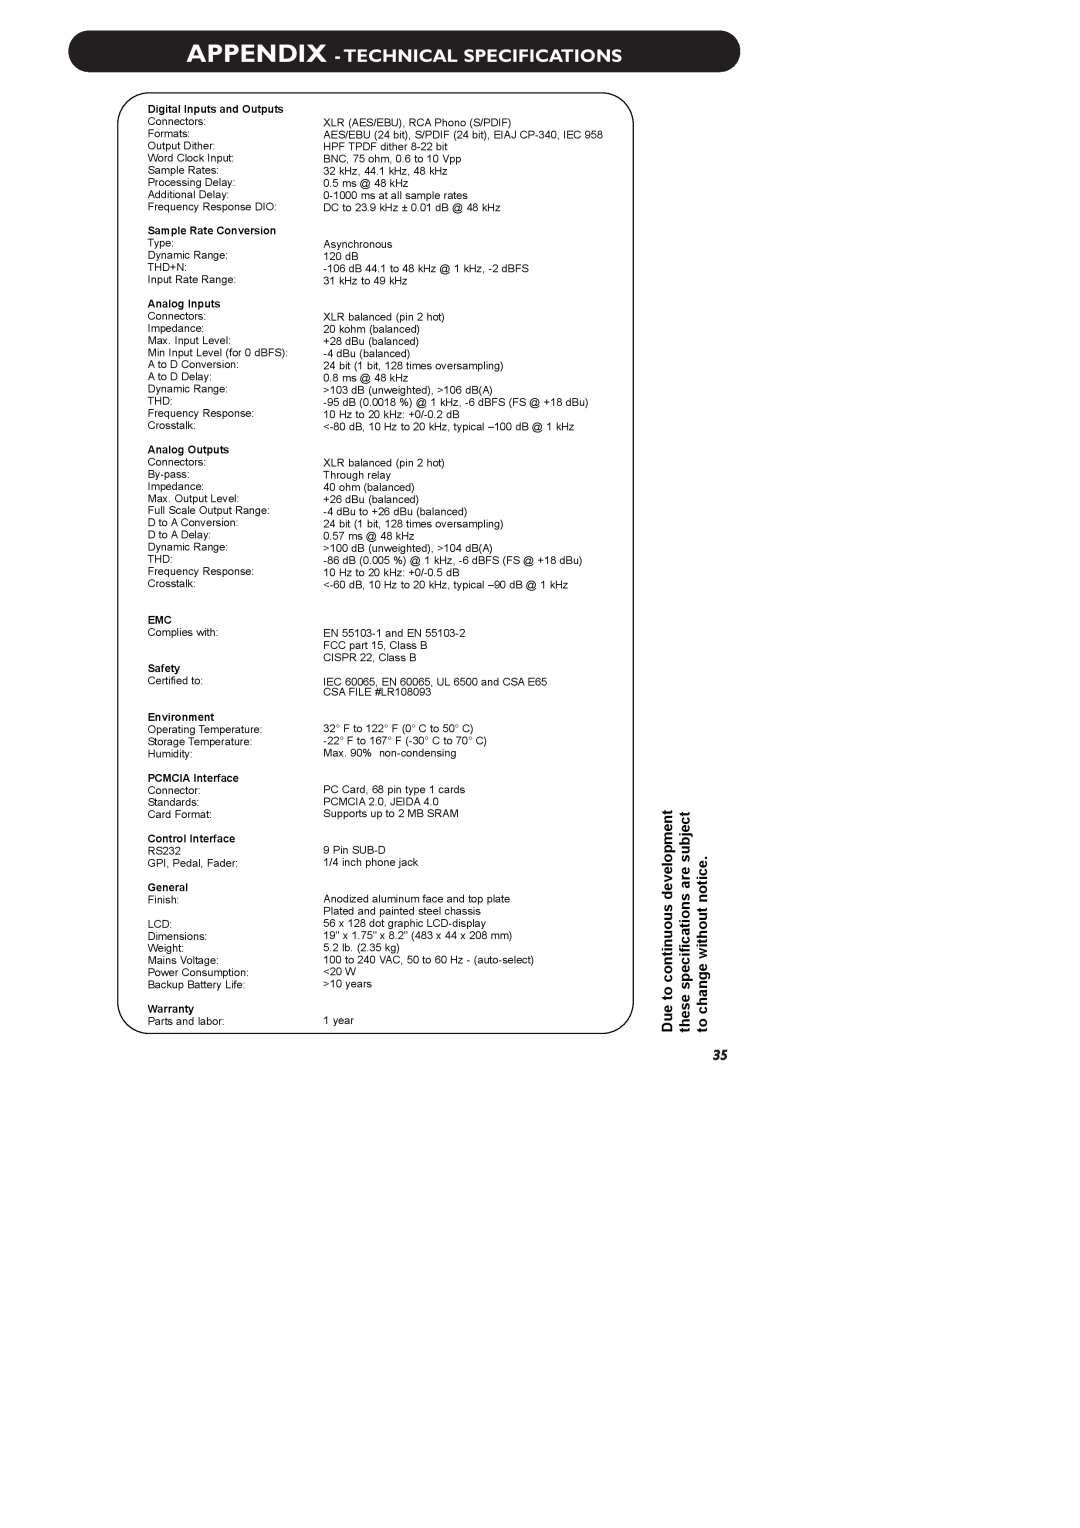 TC electronic SDN BHD P2 manual Appendix - Technical Specifications 